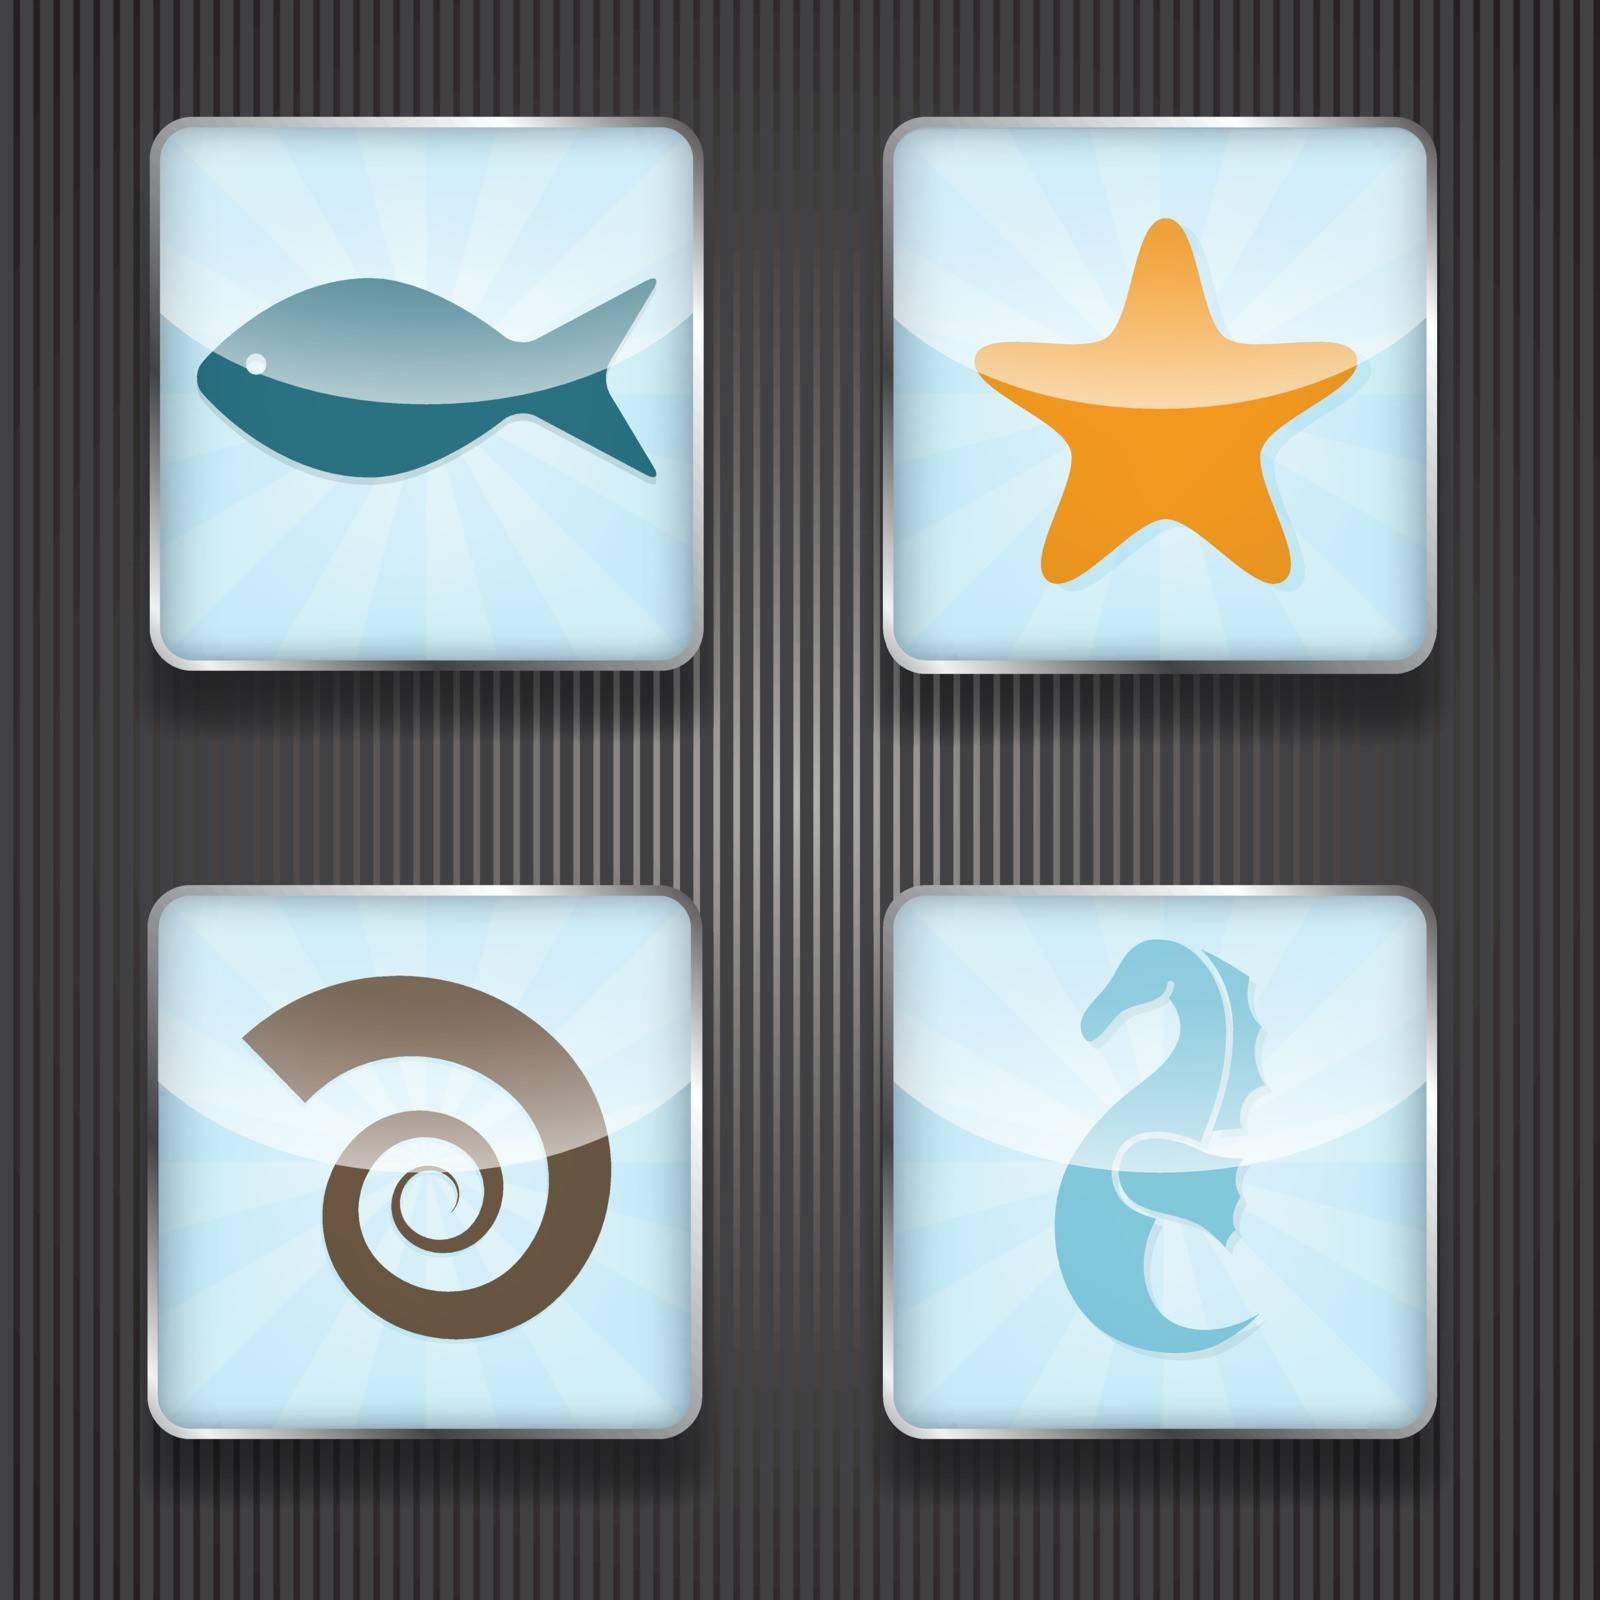 4 vector shiny icons with sea horse, star, fish and shell,  transparency effects, fully editable eps 10 file